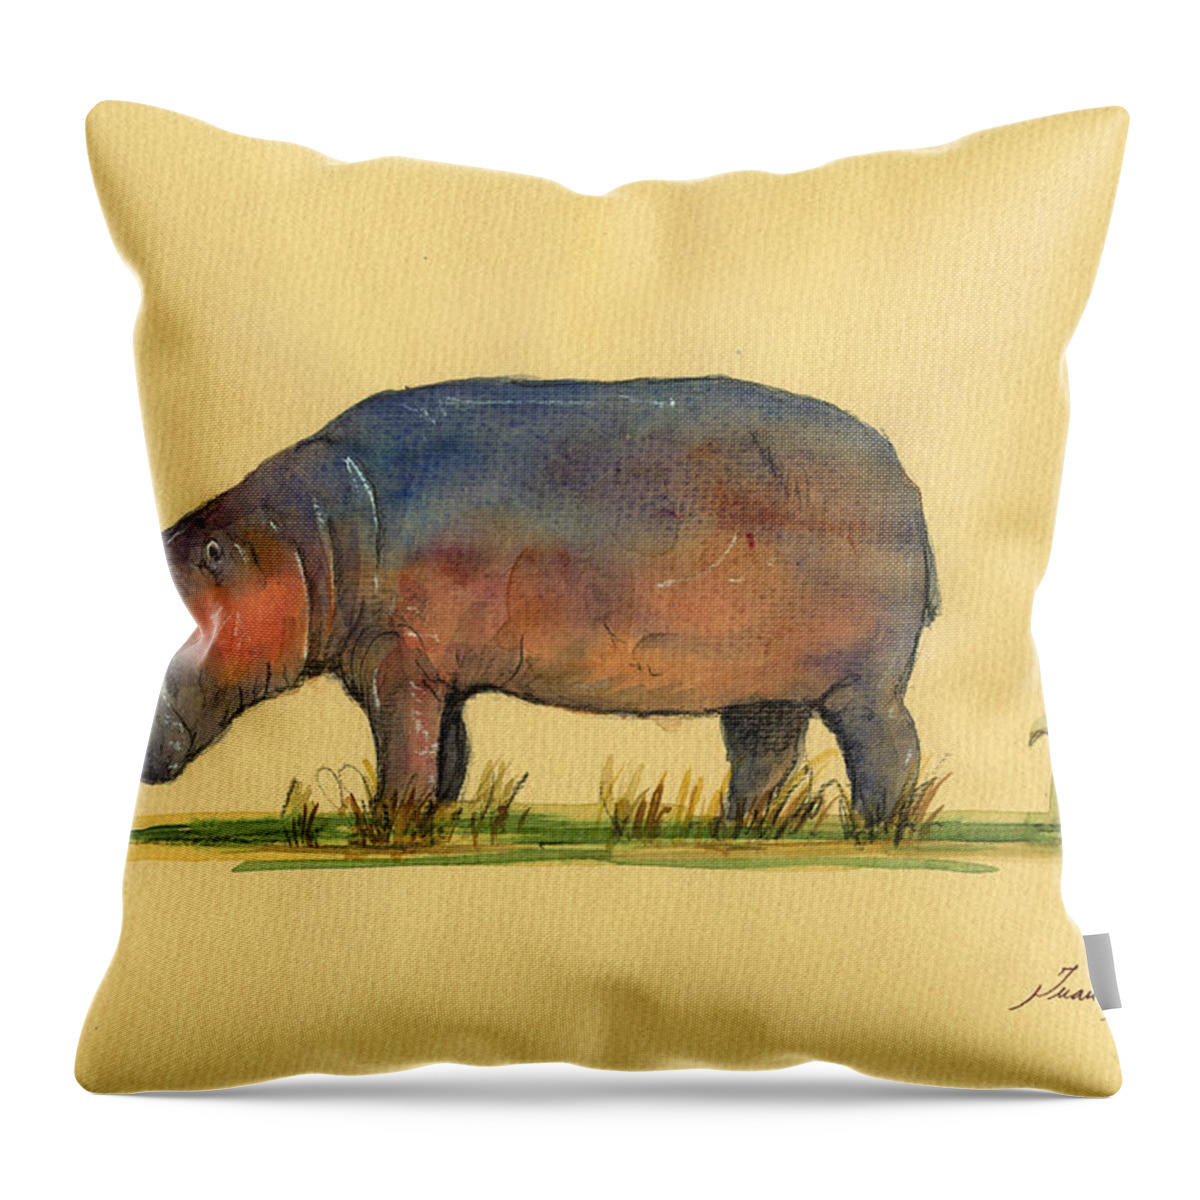 Hippo Throw Pillow featuring the painting Hippo watercolor painting by Juan Bosco